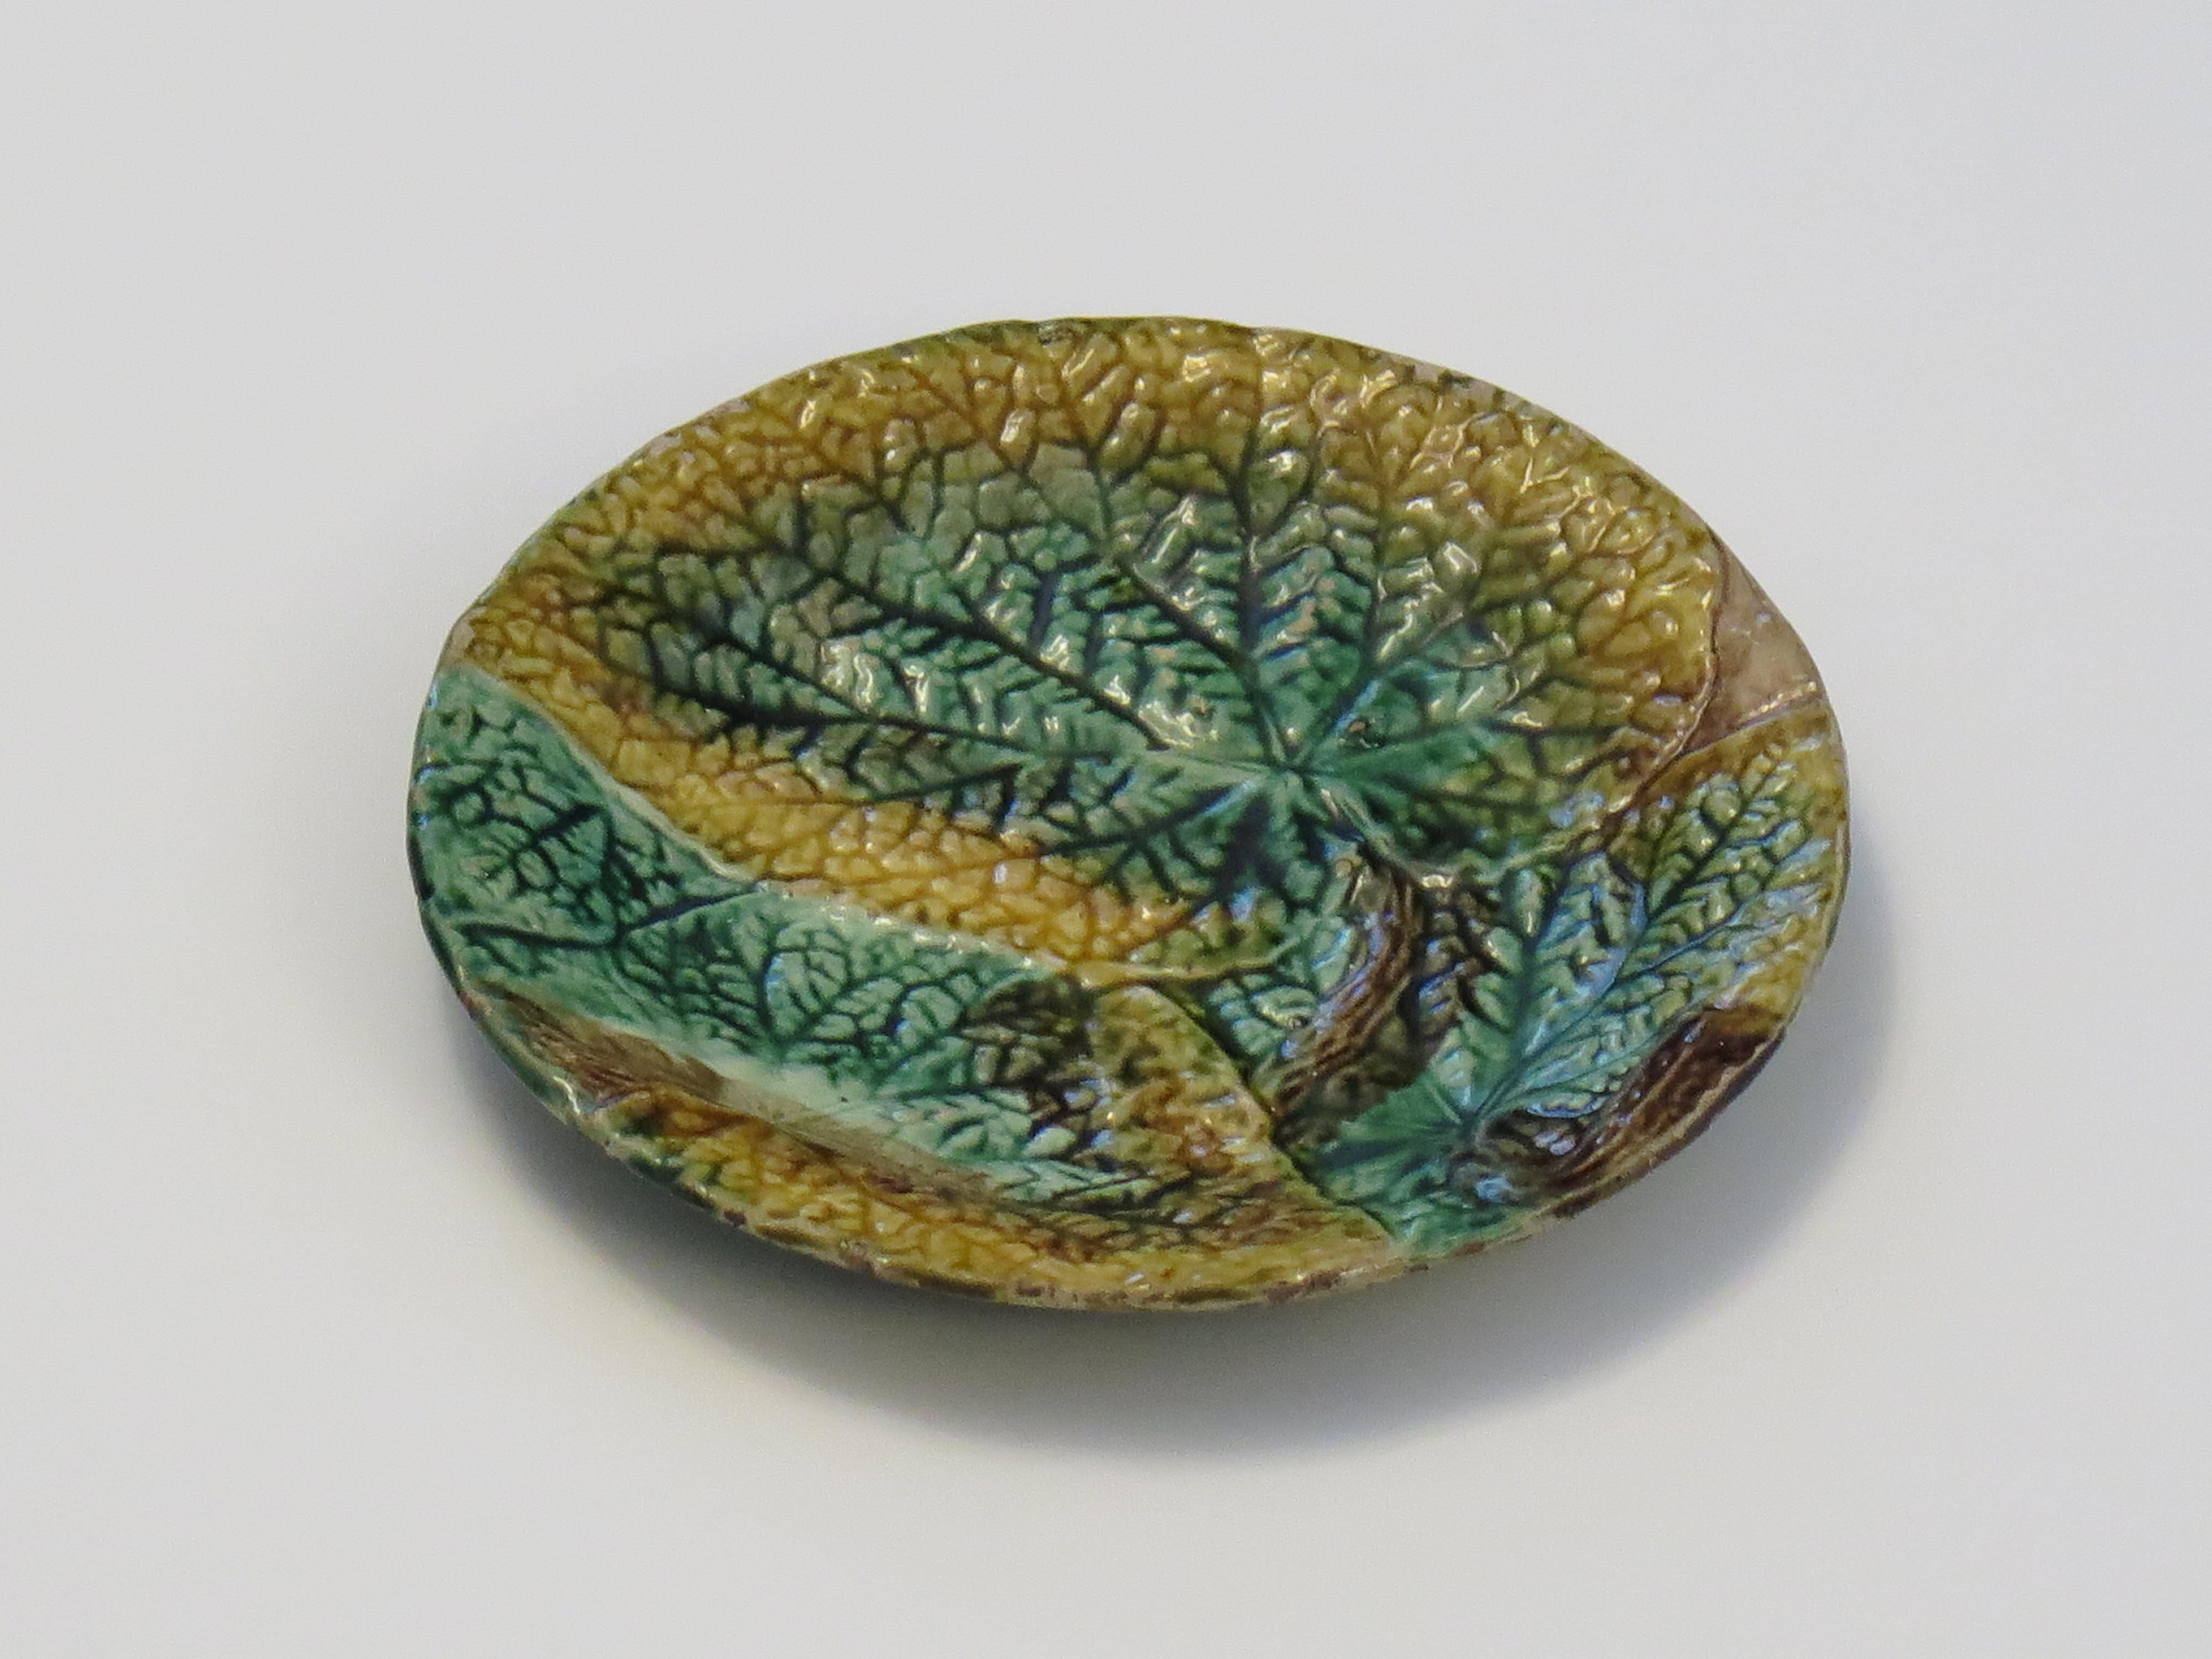 English George Jones antique Majolica Plate in Begonia Leaf pattern, Circa 1870 For Sale